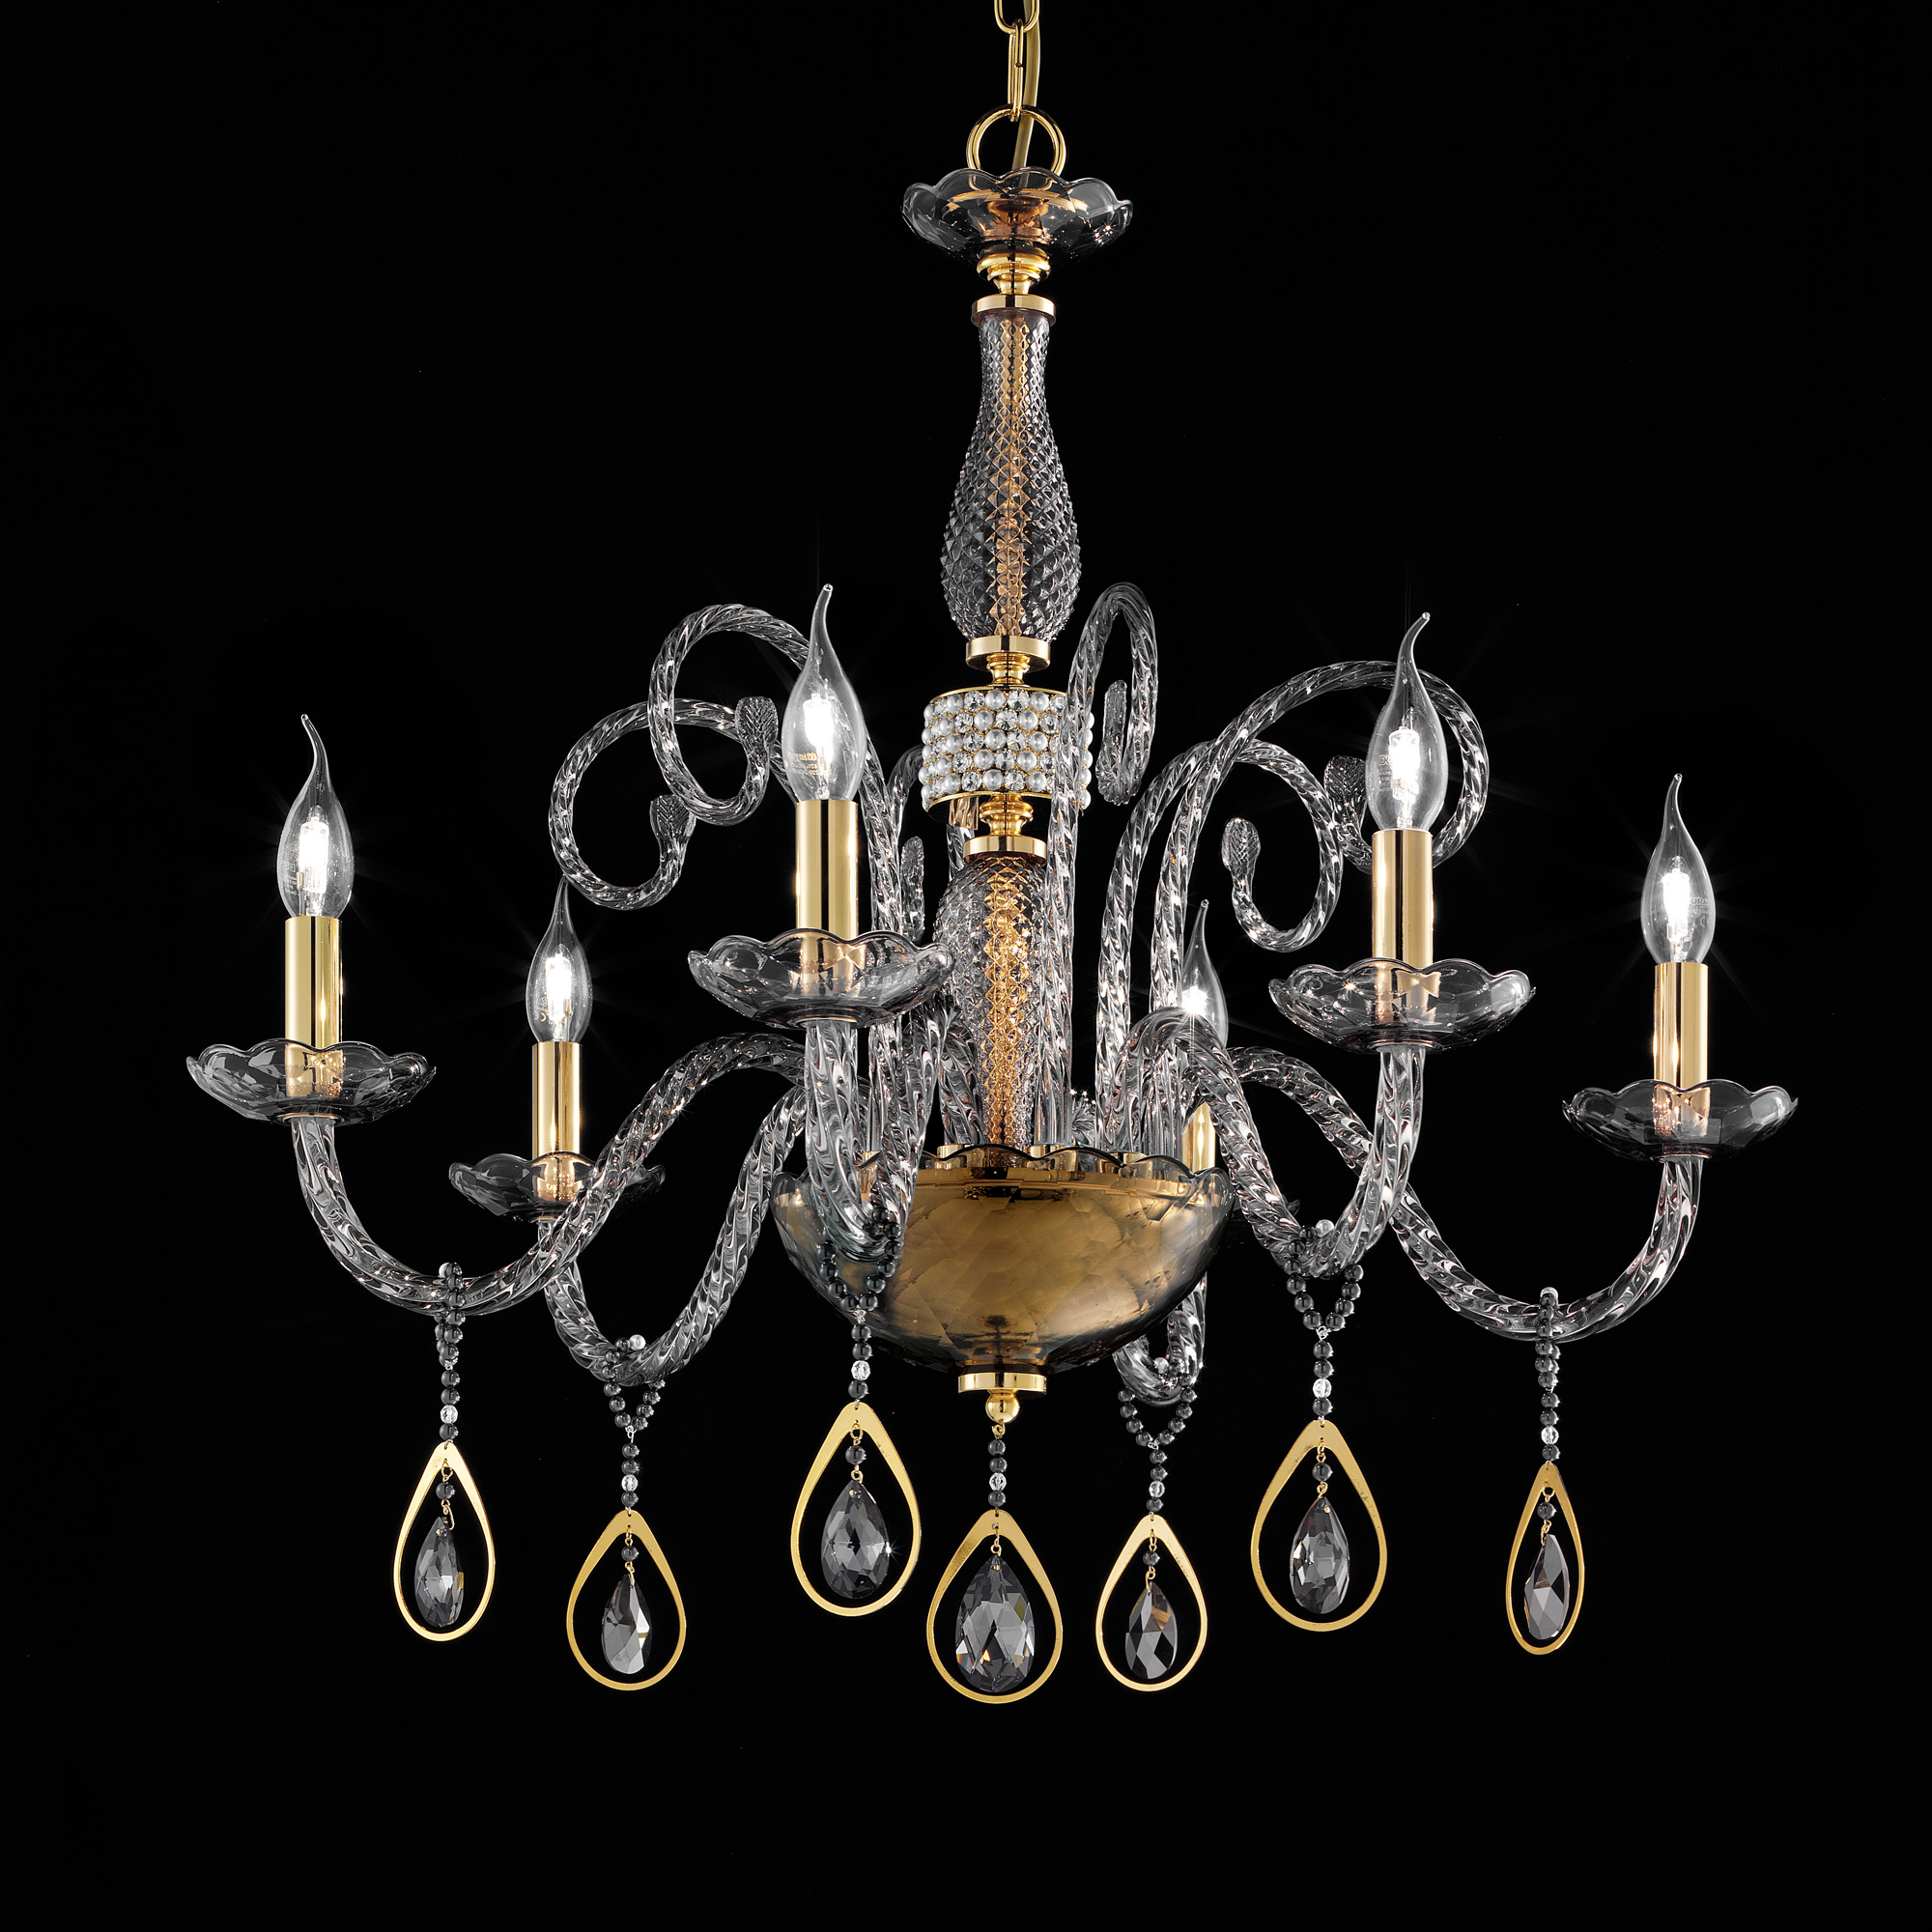 Smoked Glass Chandelier With Swarovski® Crystals And Pearls